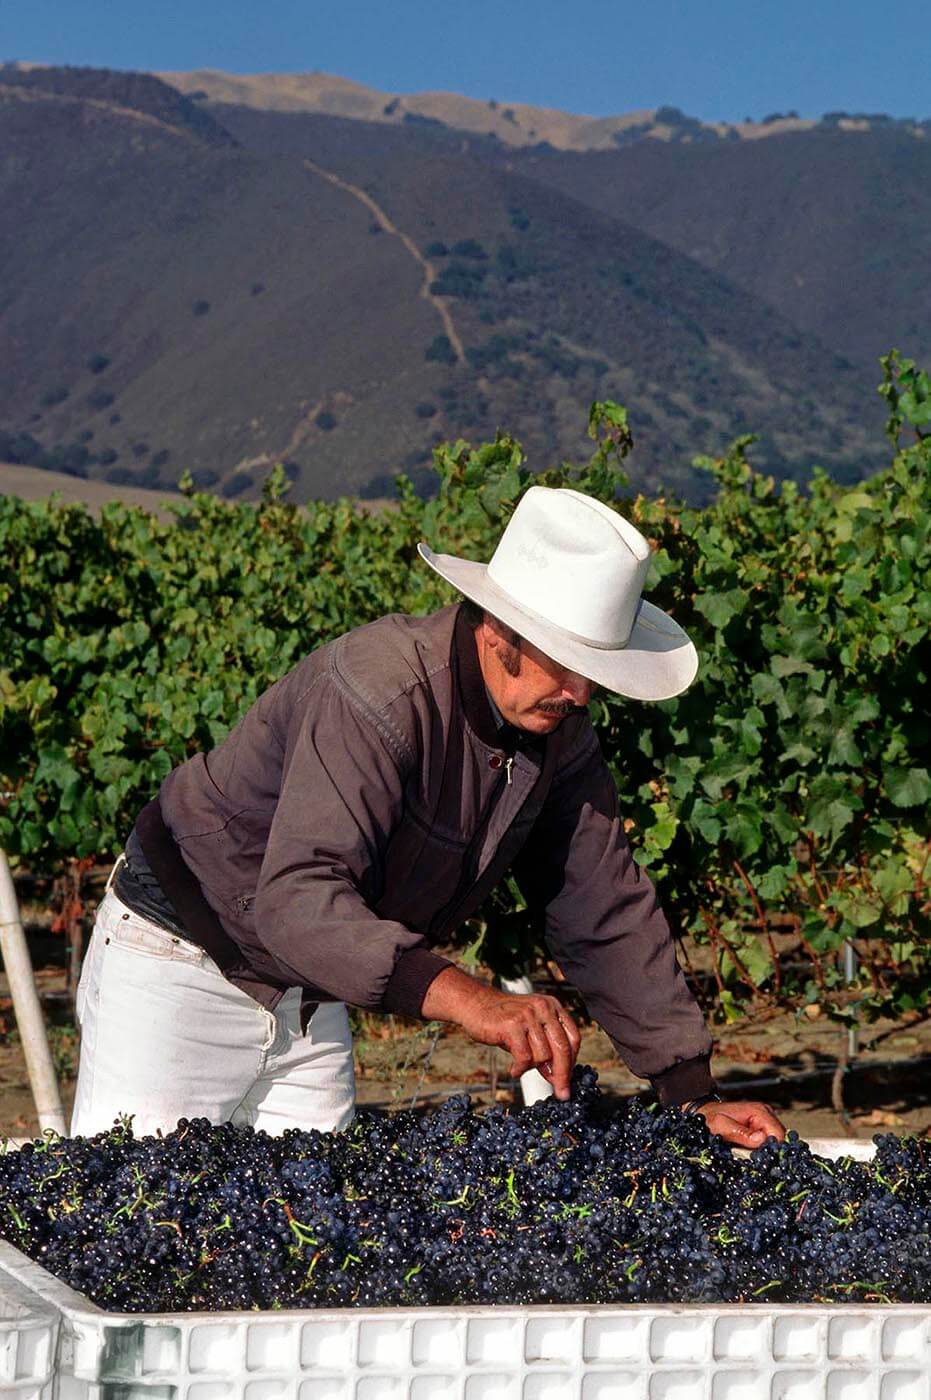 A farm worker inspects & cleans PINOT NOIR GRAPES  freshly picked & headed for the crush in MONTEREY COUNTY CALIFORNIA. - Wine Industry photography by Craig Lovell